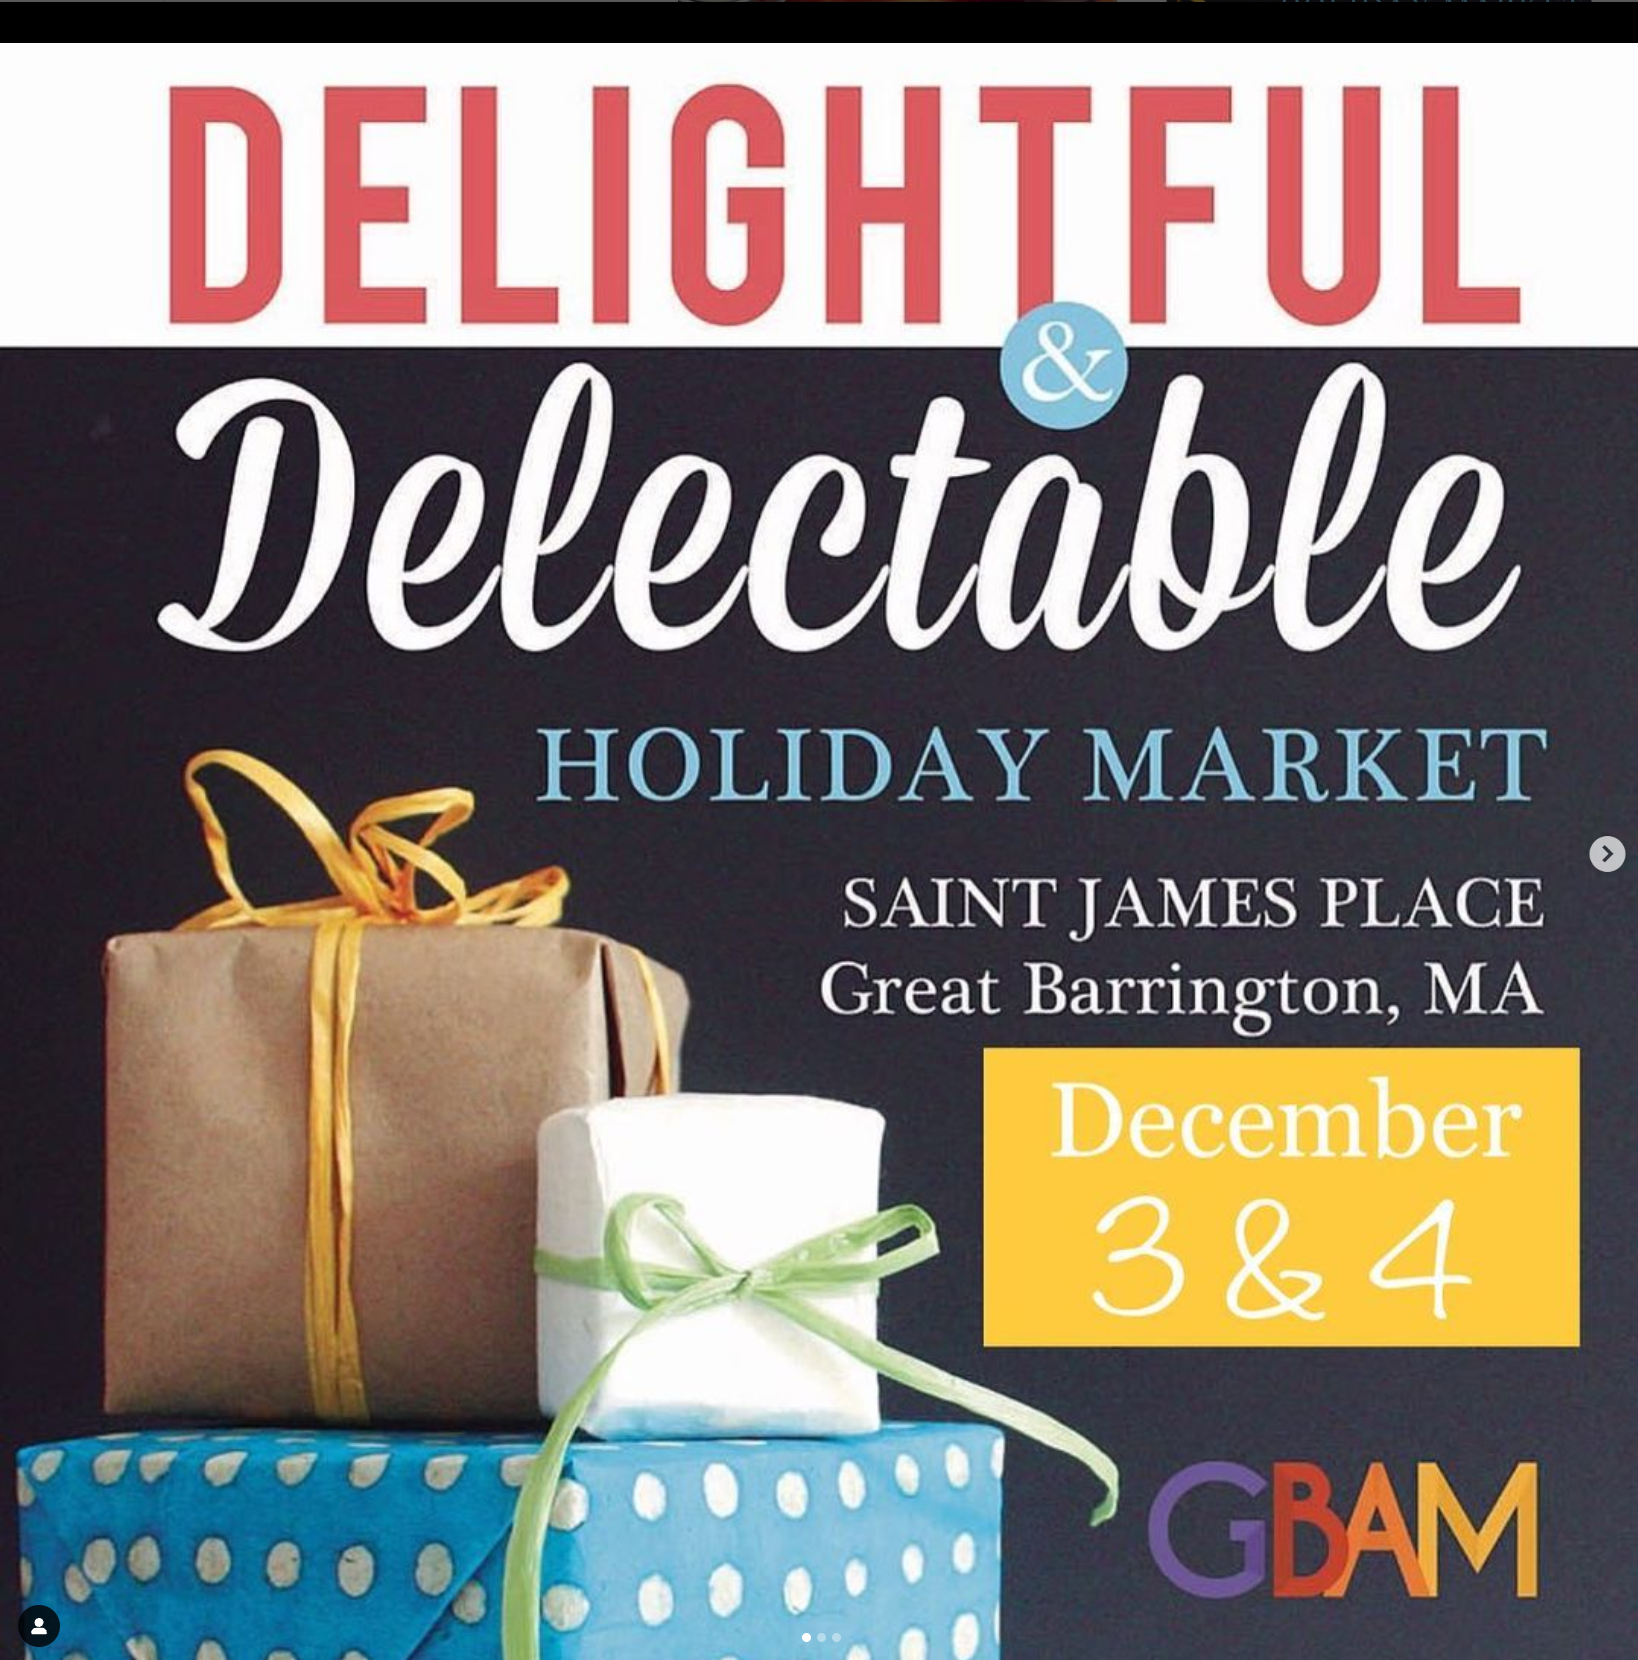 GBAM! Delightful & Delectable Holiday Market